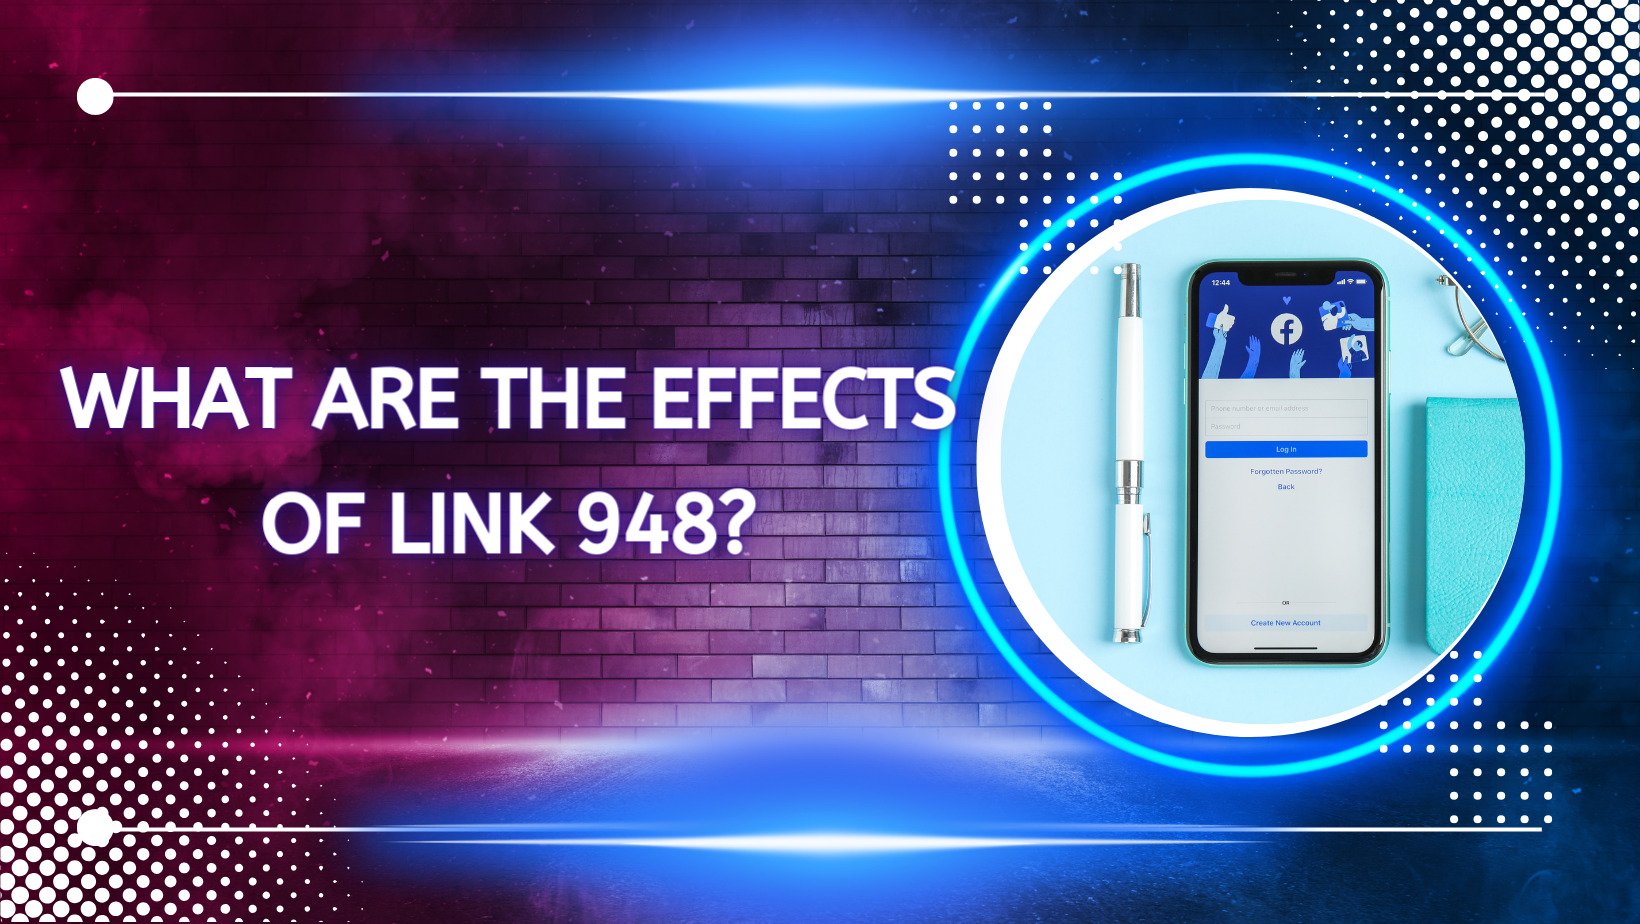 What are the effects of link 948?